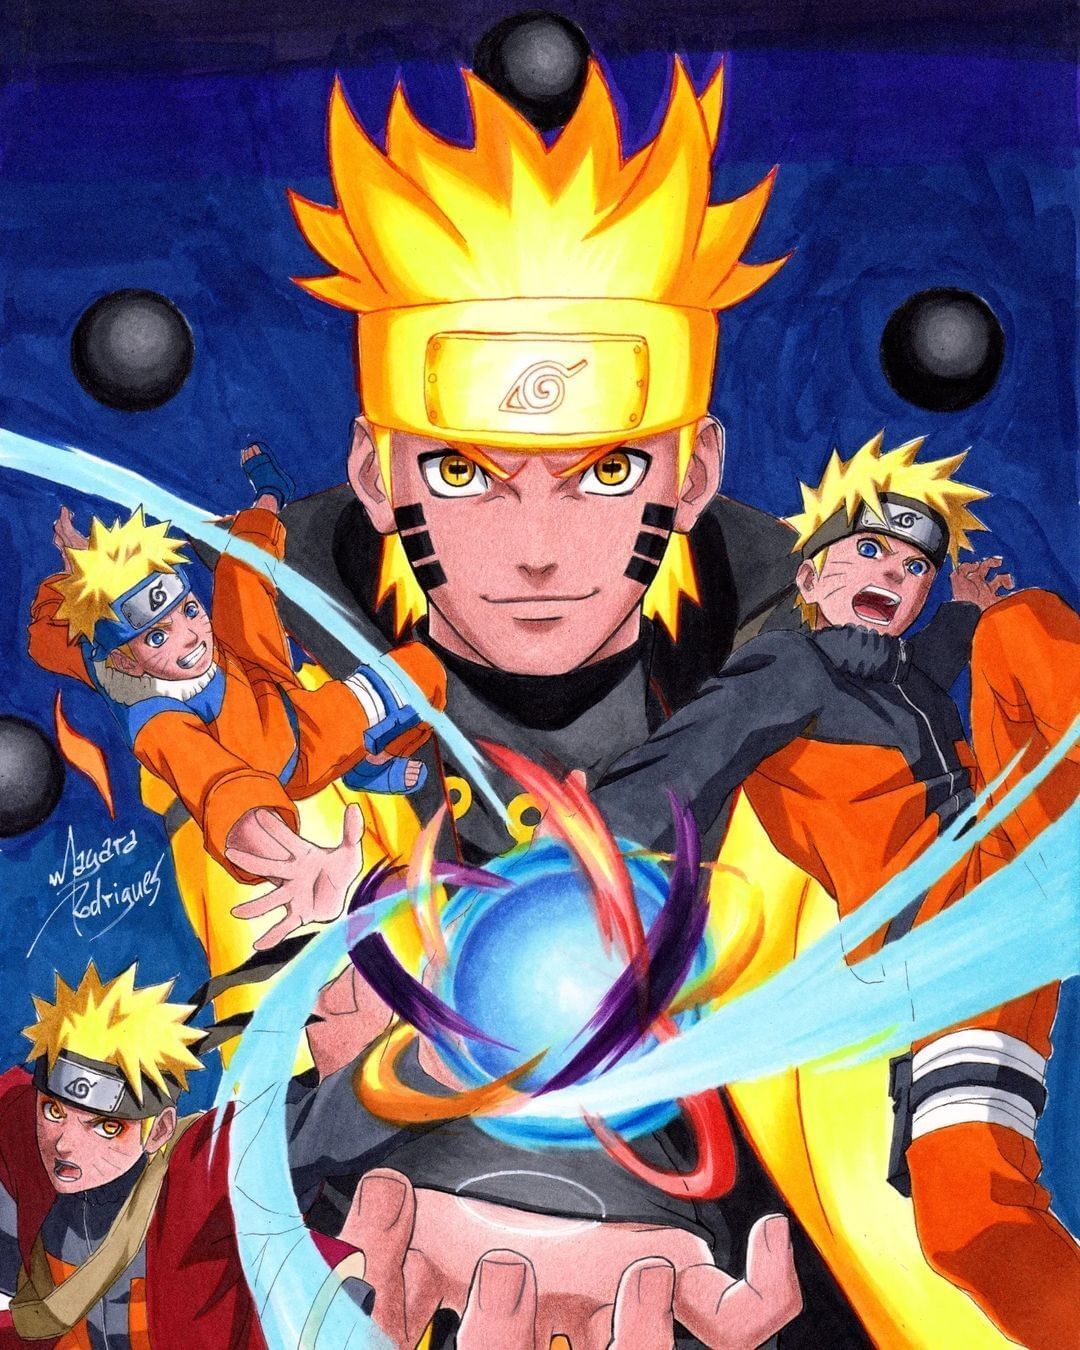 How old is Naruto? Explaining Naruto's age timeline